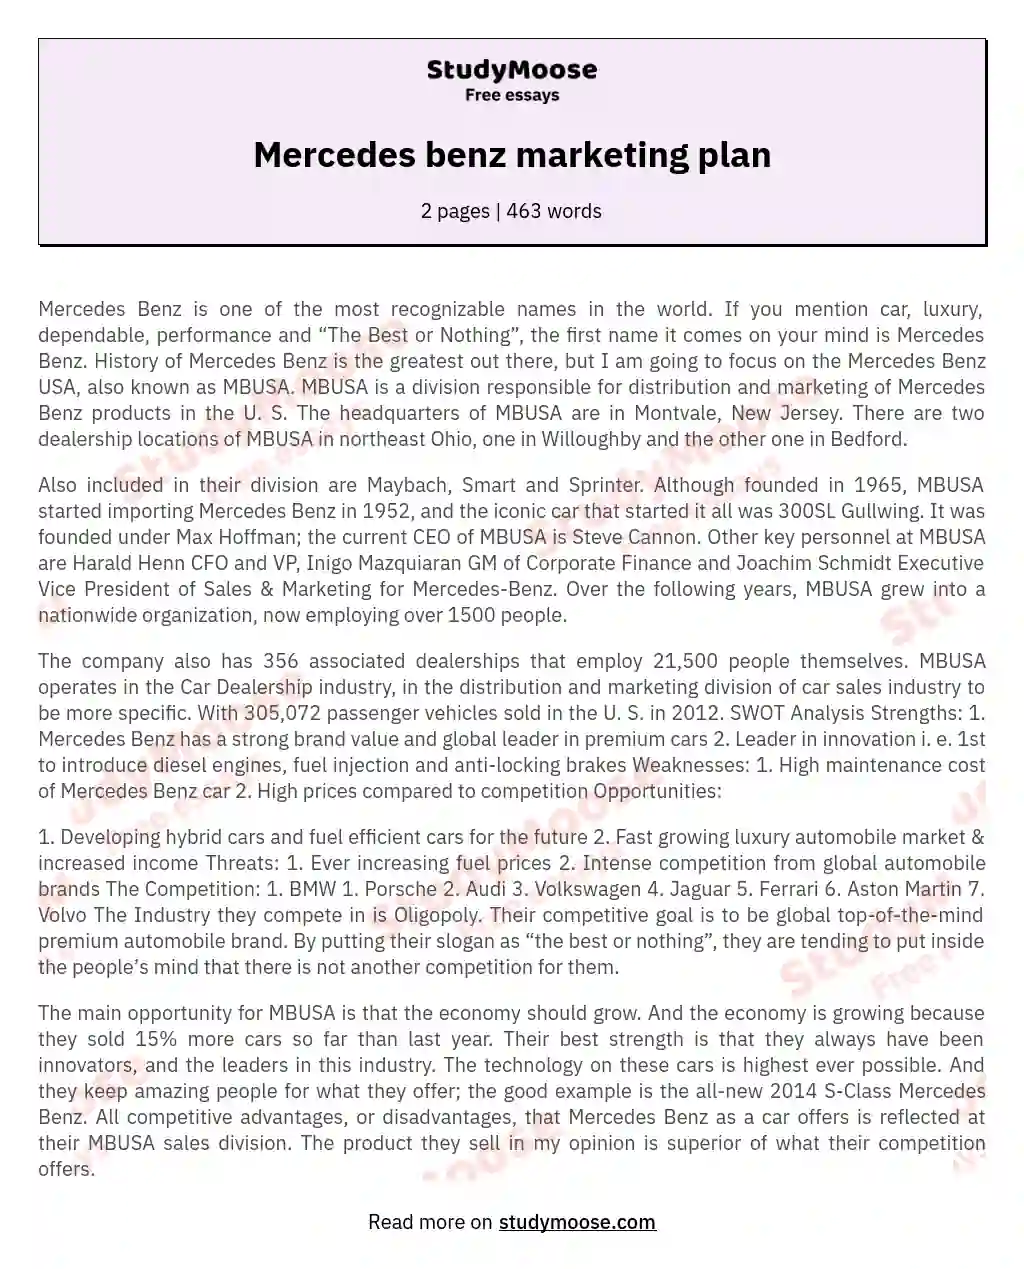 Mercedes Benz USA: Driving Excellence in the Luxury Automotive Market essay